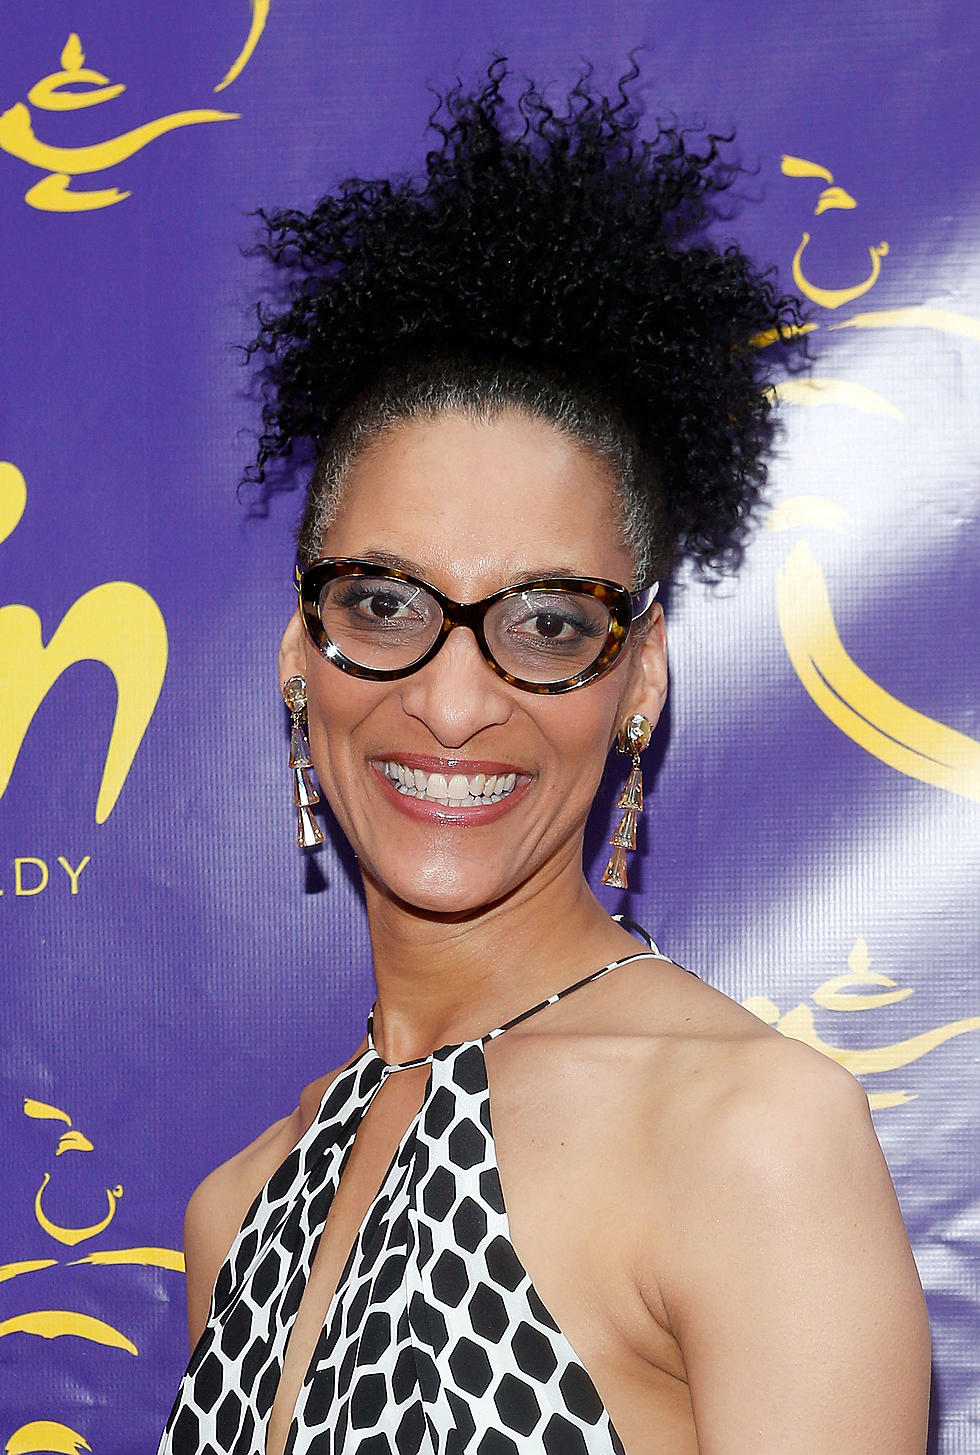 Chef Carla Hall From ‘The Chew’ Will Be Right Here In The Southern Tier At Wegman’s